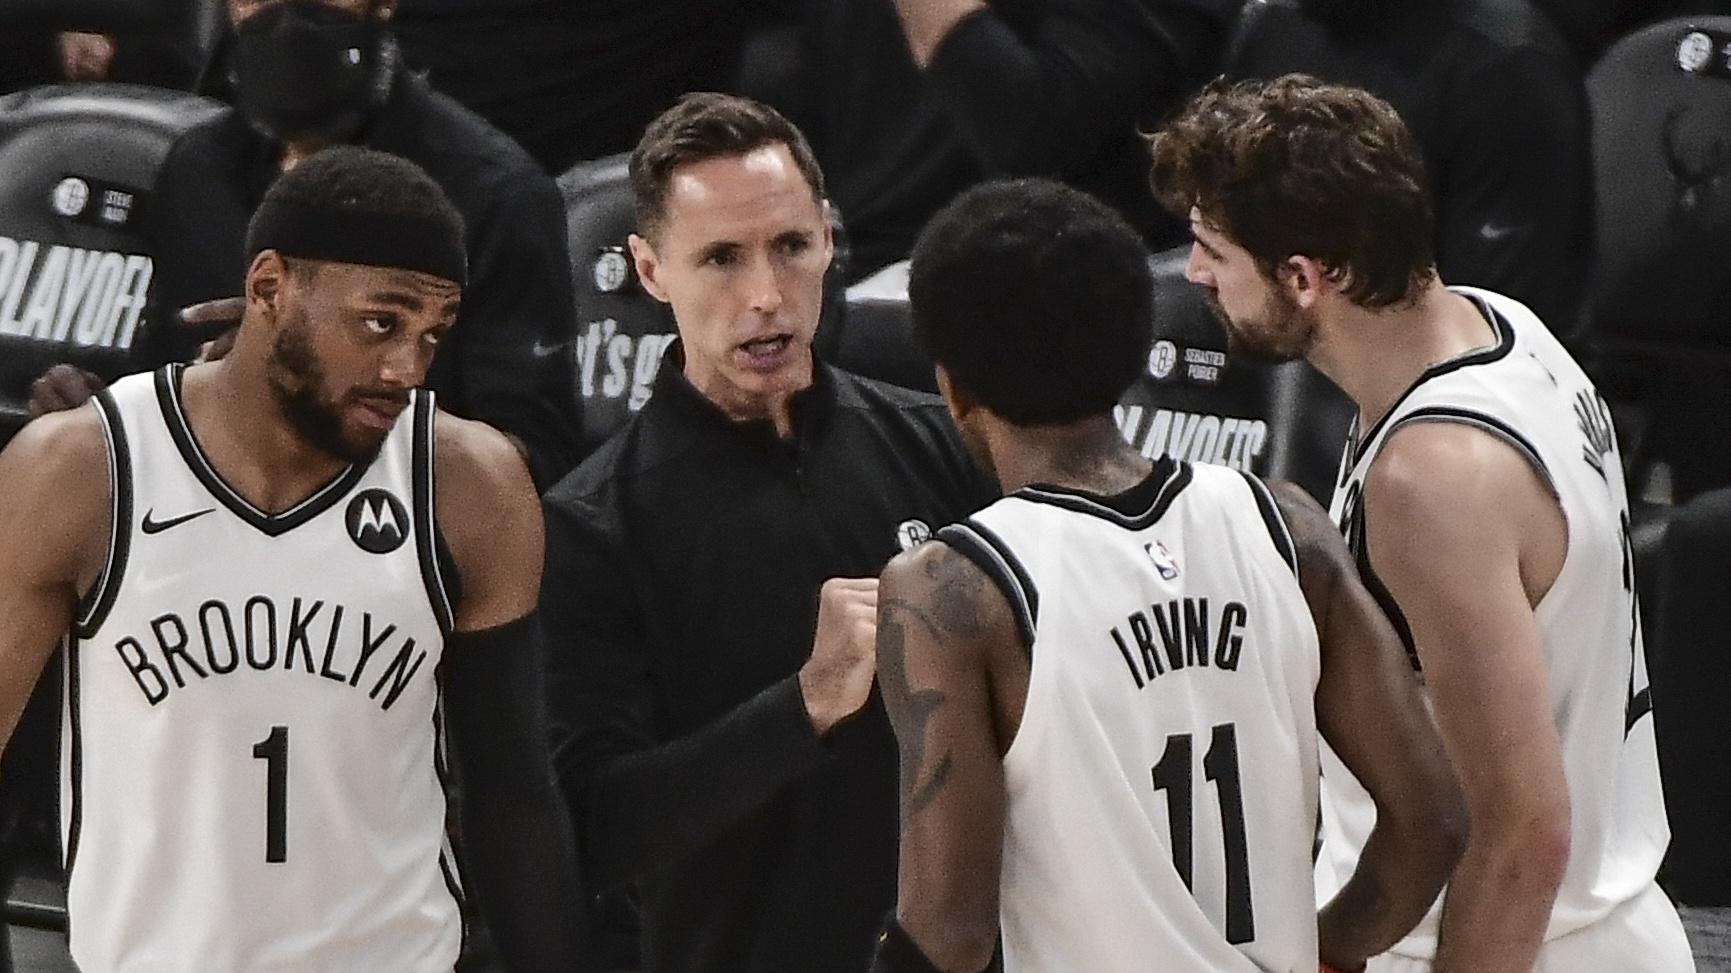 Jun 10, 2021; Milwaukee, Wisconsin, USA; Brooklyn Nets head coach Steve Nash sets up a play with forward Bruce Brown (1) and guard Kyrie Irving (11) in the second quarter against the Milwaukee Bucks during game three in the second round of the 2021 NBA Playoffs at Fiserv Forum. Mandatory Credit: Benny Sieu-USA TODAY Sports / © Benny Sieu-USA TODAY Sports